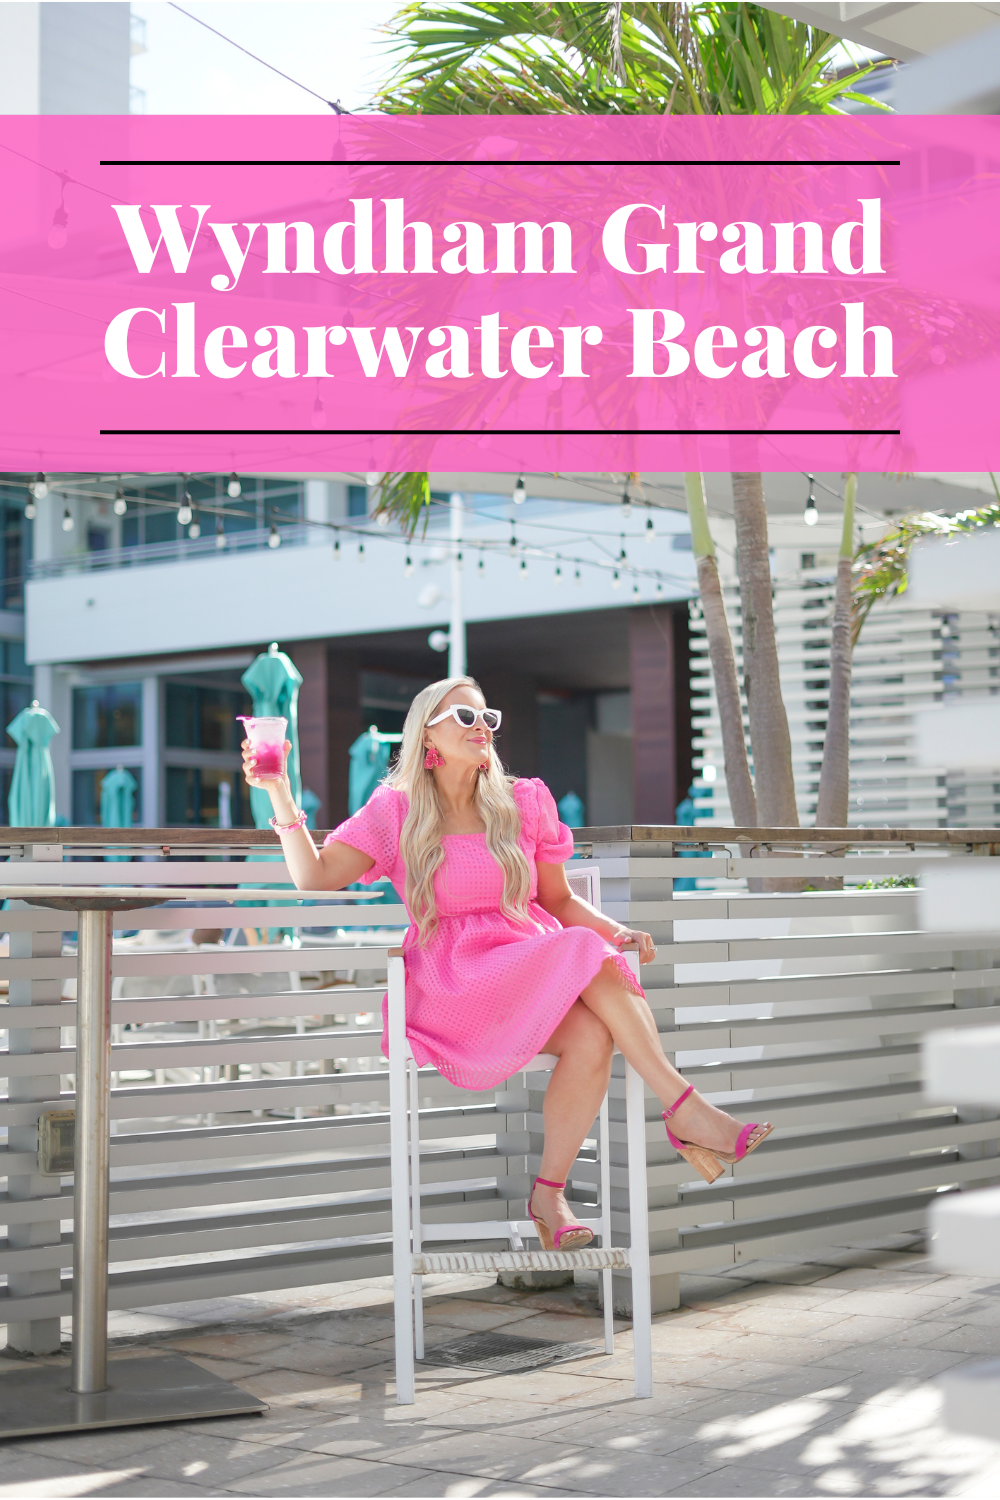 Florida Blogger, Jill DiGioia sits in a hot pink dress at the Wyndham Grand Clearwater Beach